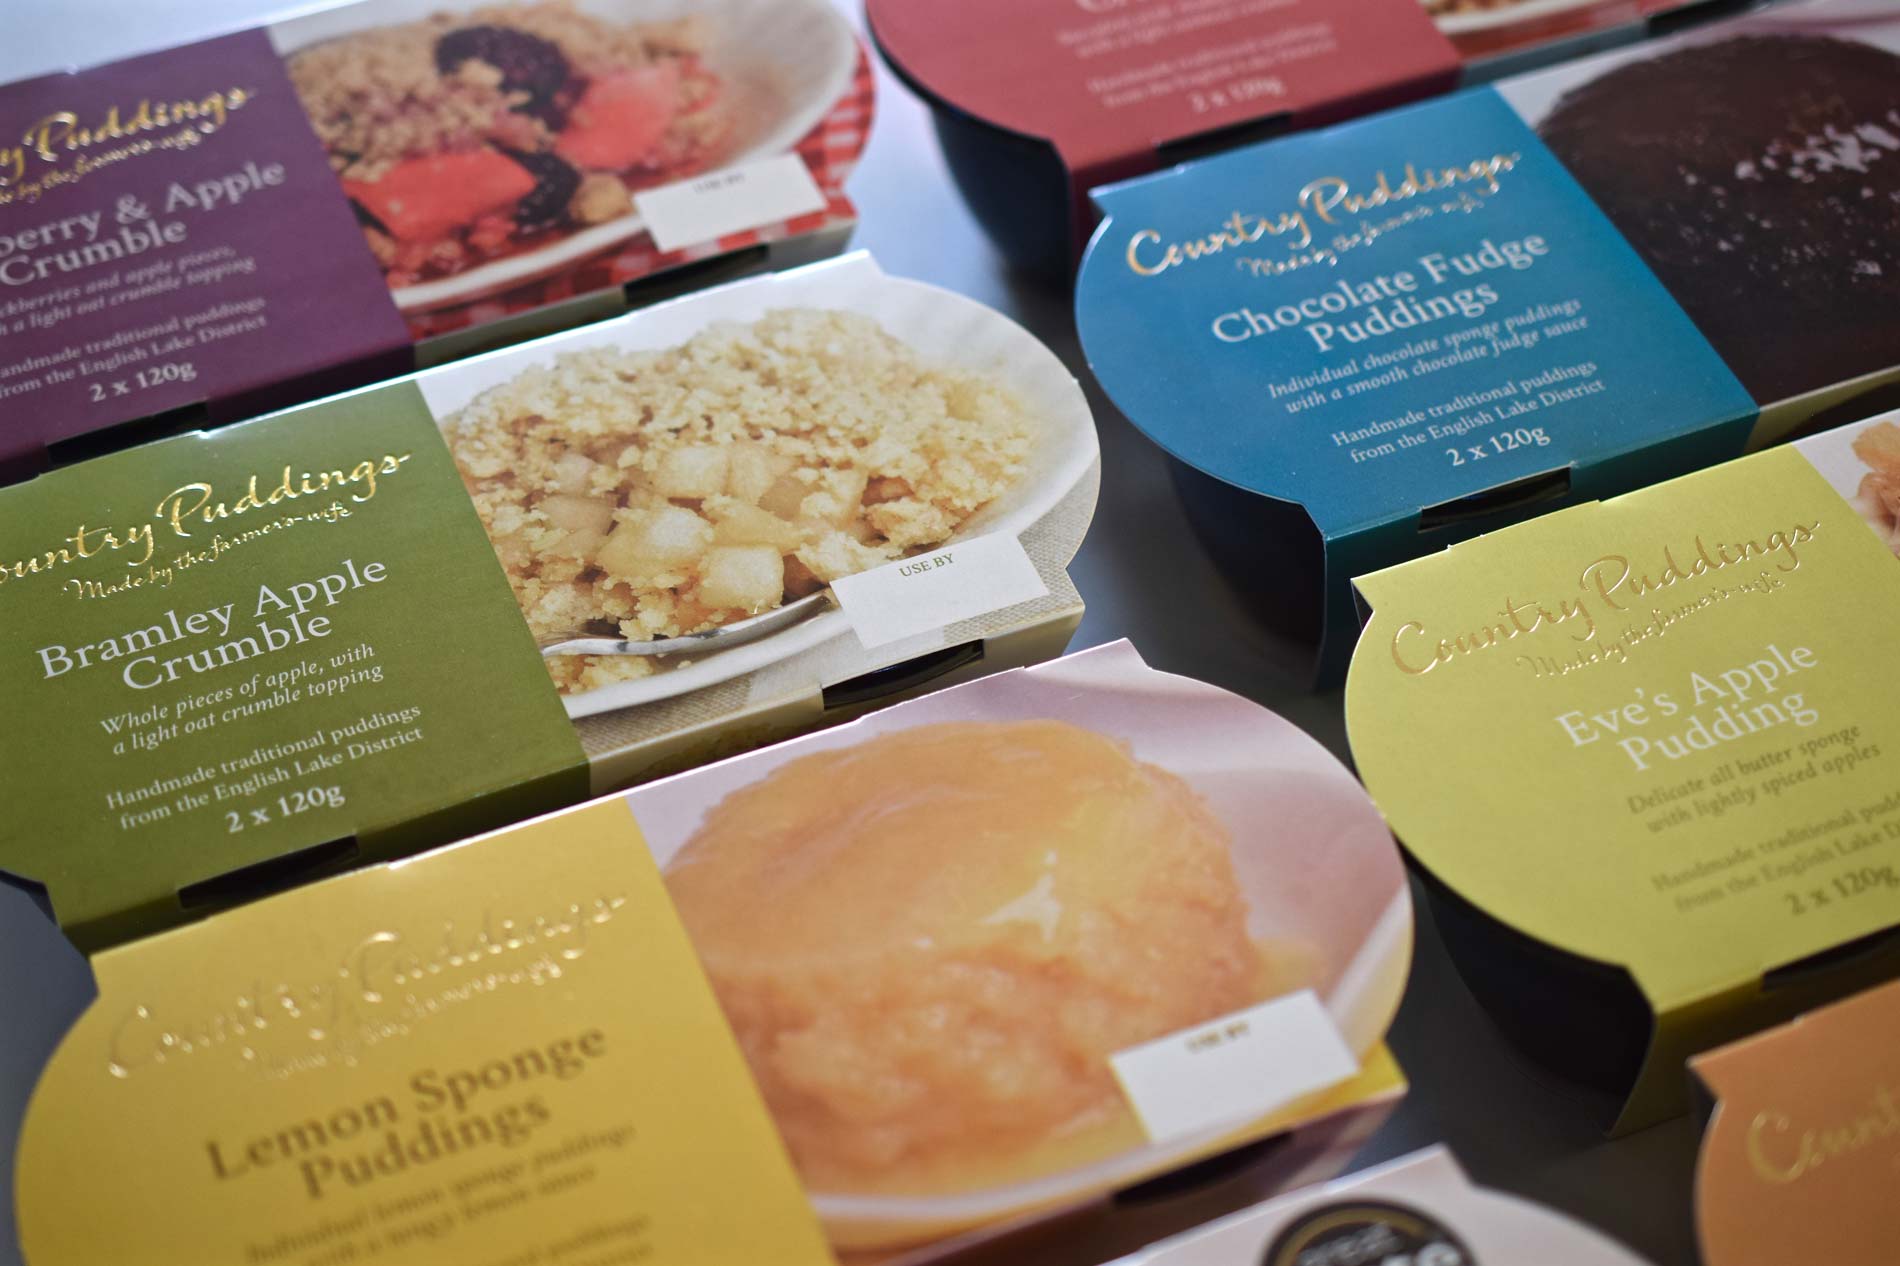 Country Puddings branding, logo and packaging design